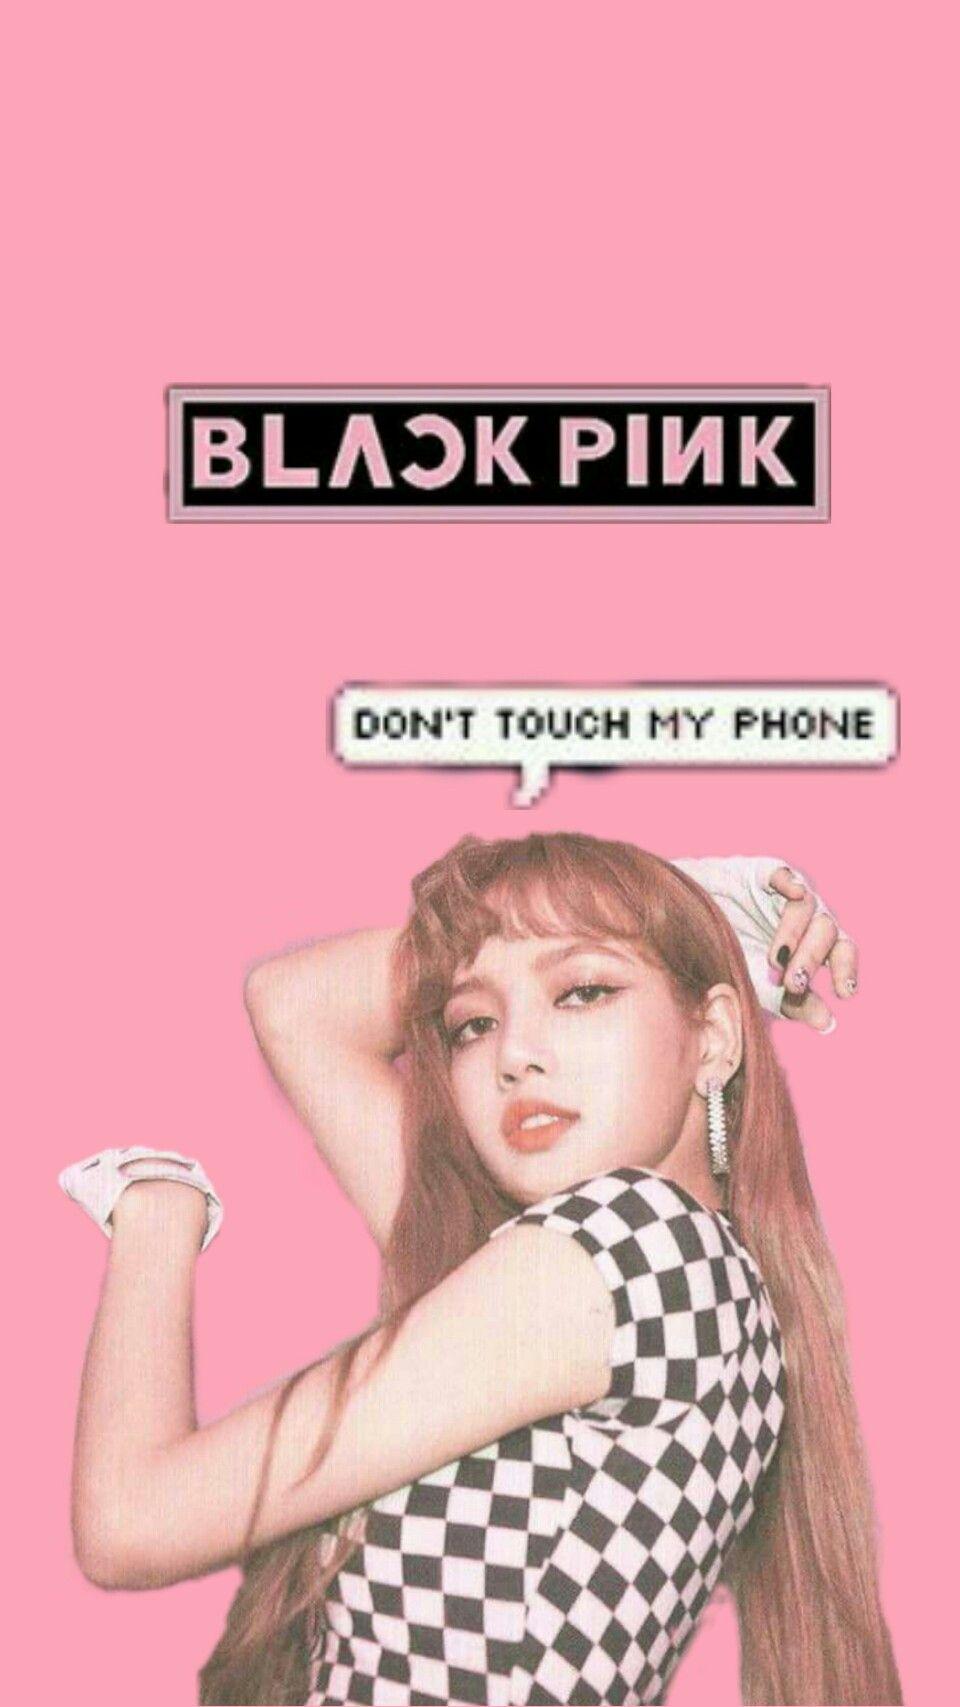 don't touch my phone wallpaper blackpink. Dont touch my phone wallpaper, Dont touch, Dont touch me